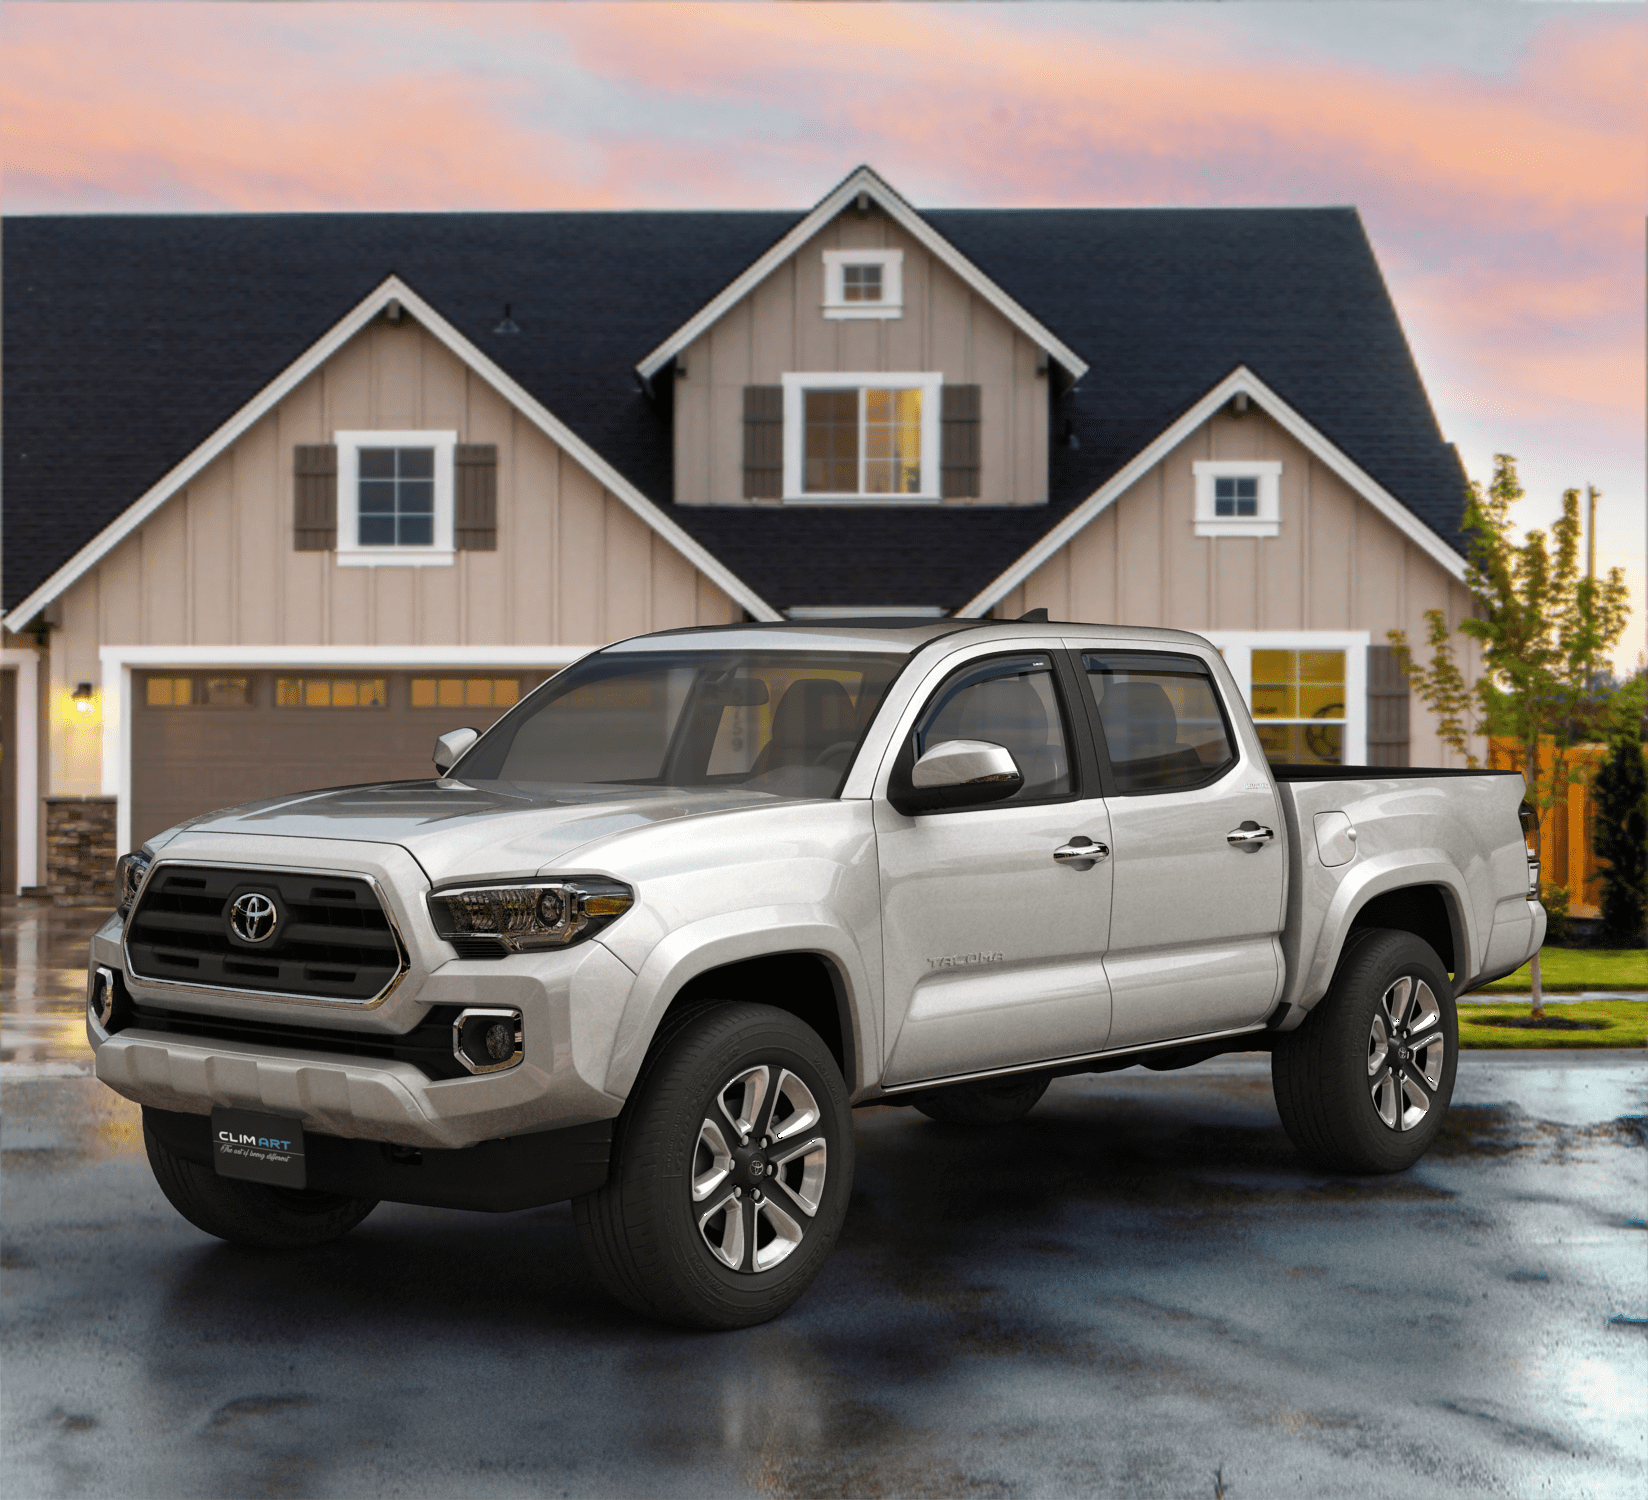 Original Window Deflectors Vent Deflector Smoke Truck Accessories 4 pcs- 616012 CLIM ART in-Channel Incredibly Durable Rain Guards for Toyota Tacoma Truck 2016-2020 Double Cab Vent Window Visors